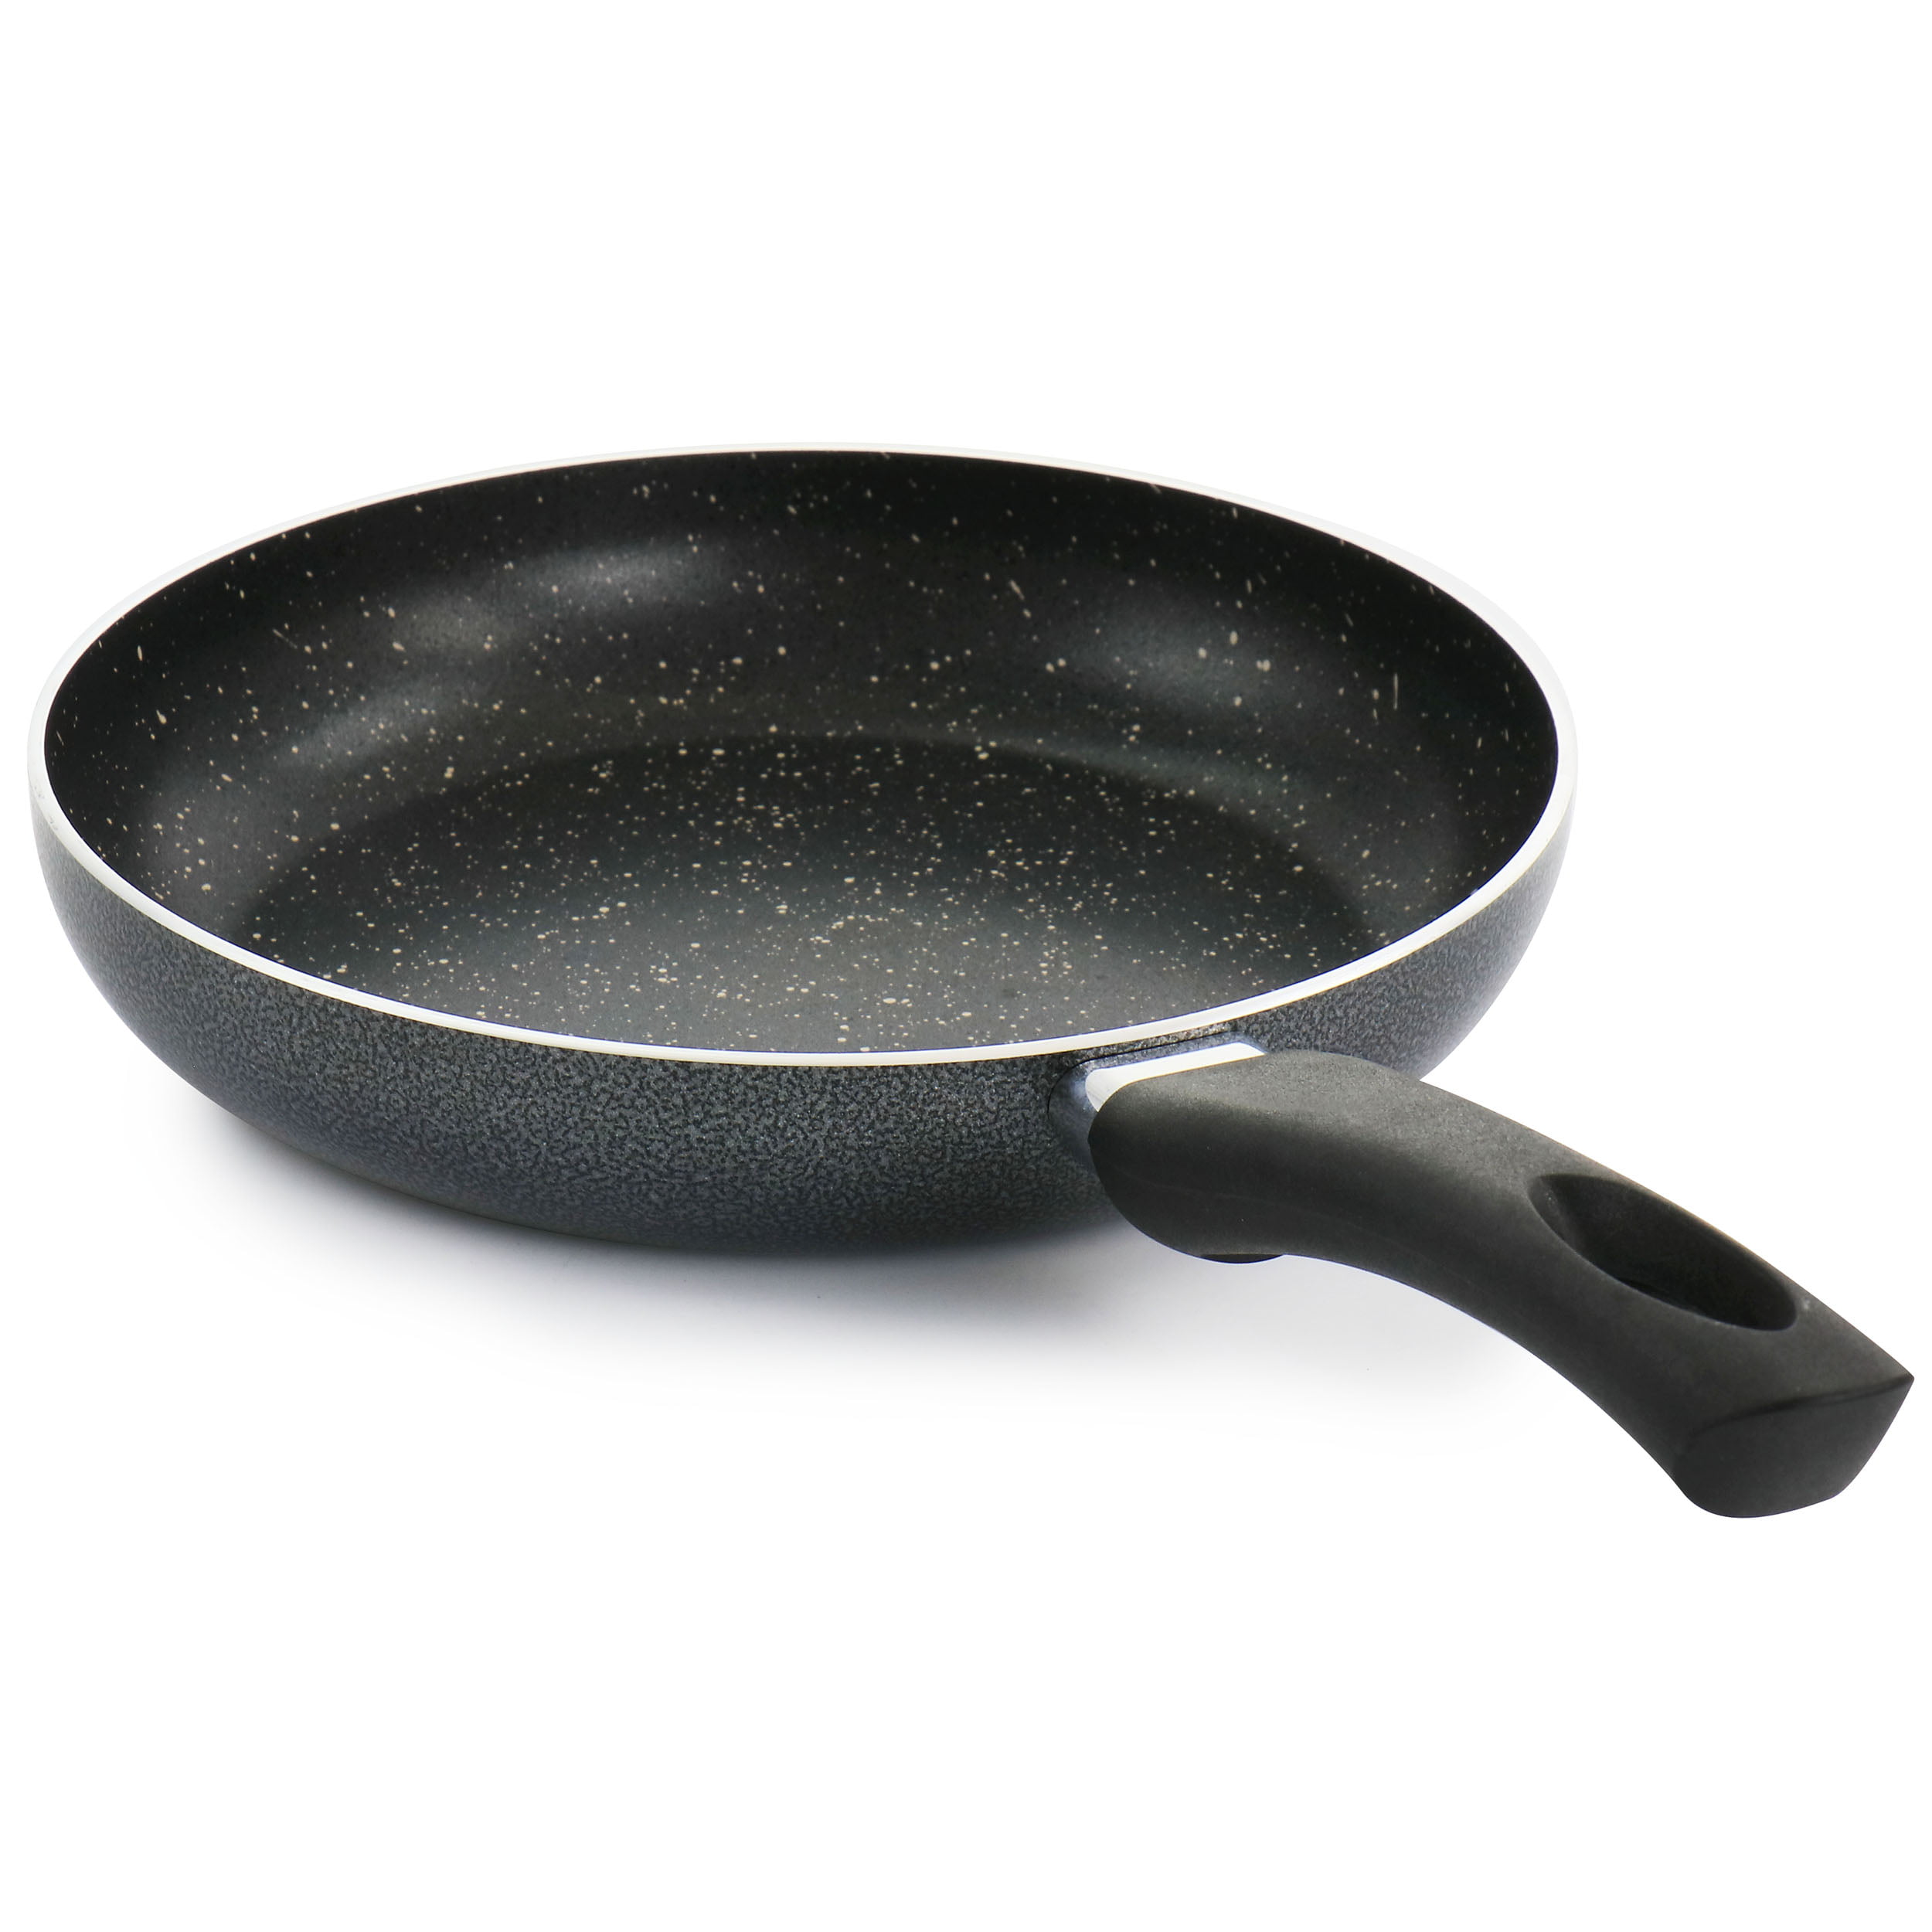 Oster Rigby 12 Inch Aluminum Nonstick Frying Pan in Green with Pouring  Spouts